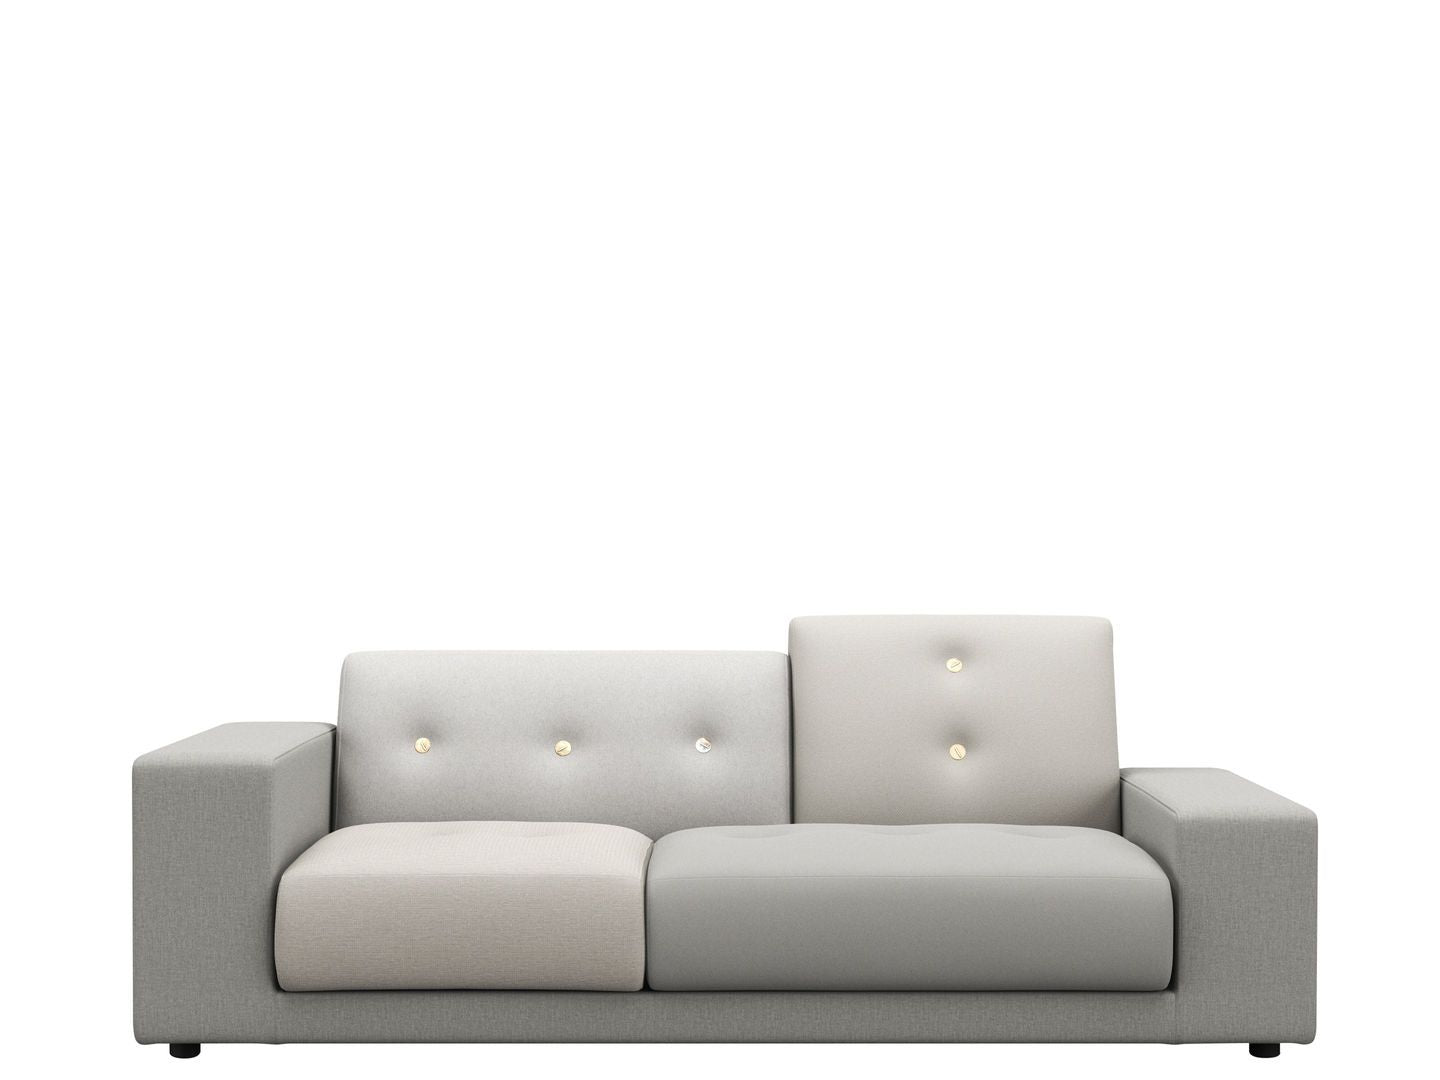 Vitra Polder Compact Sofa - Perfect for Small Spaces